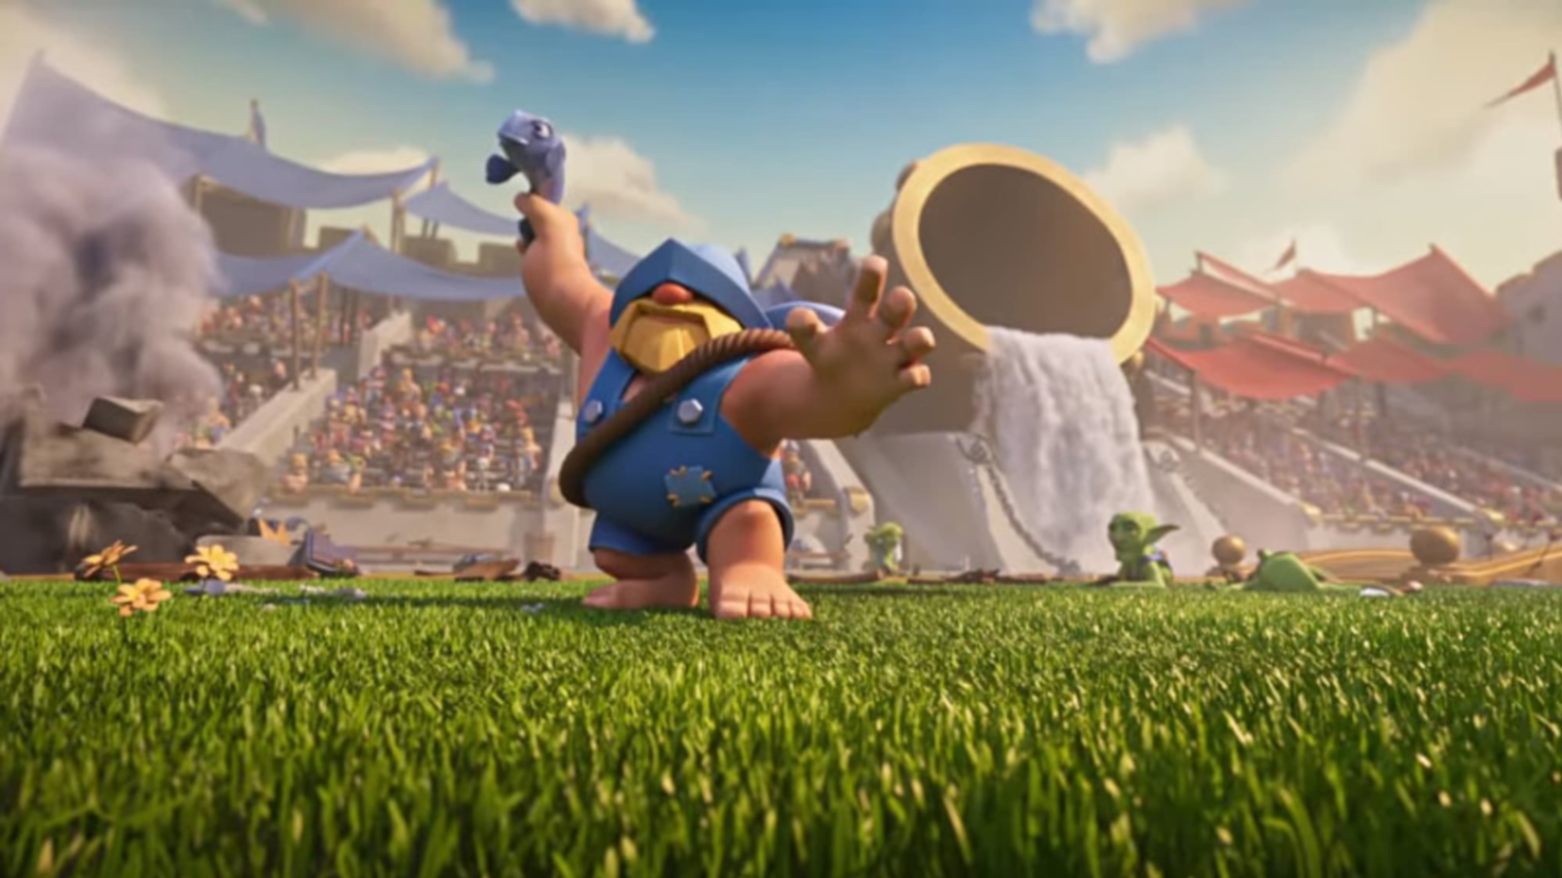 Clash Royale: See All the Legendary Cards and Their Advantages